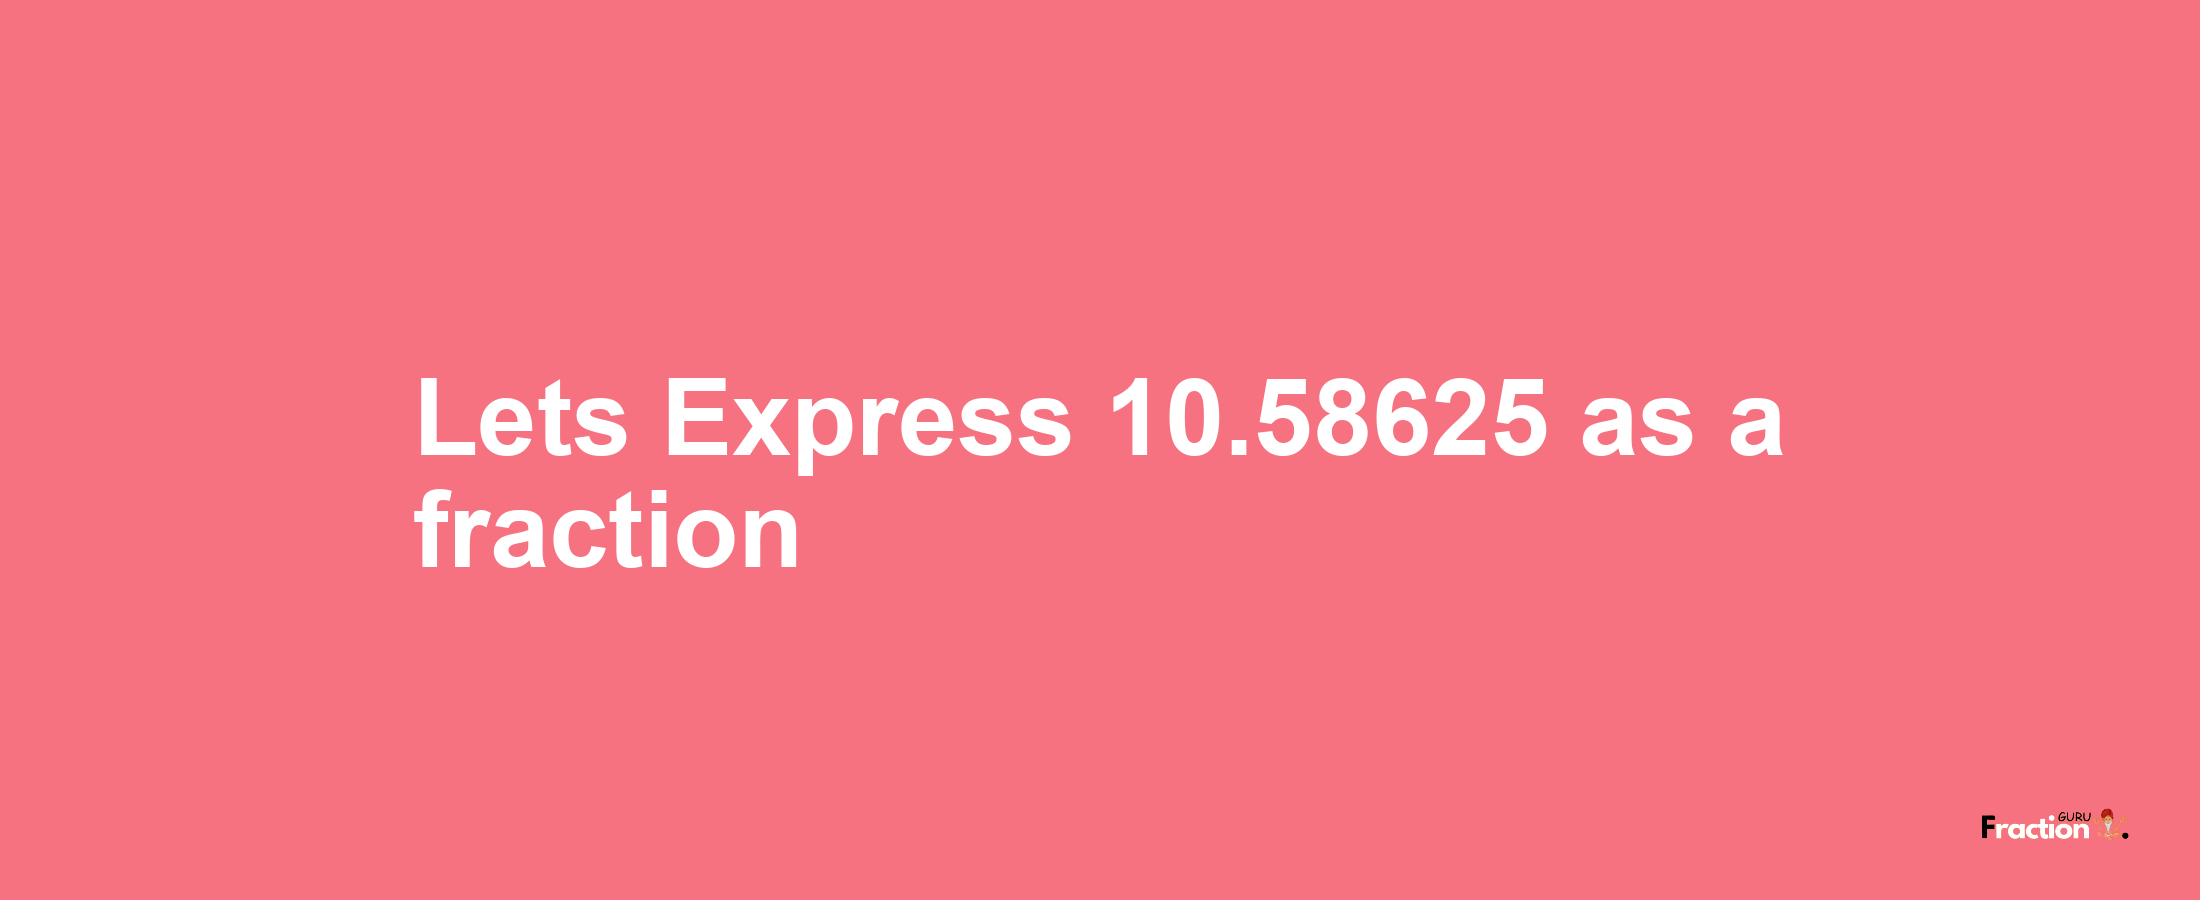 Lets Express 10.58625 as afraction